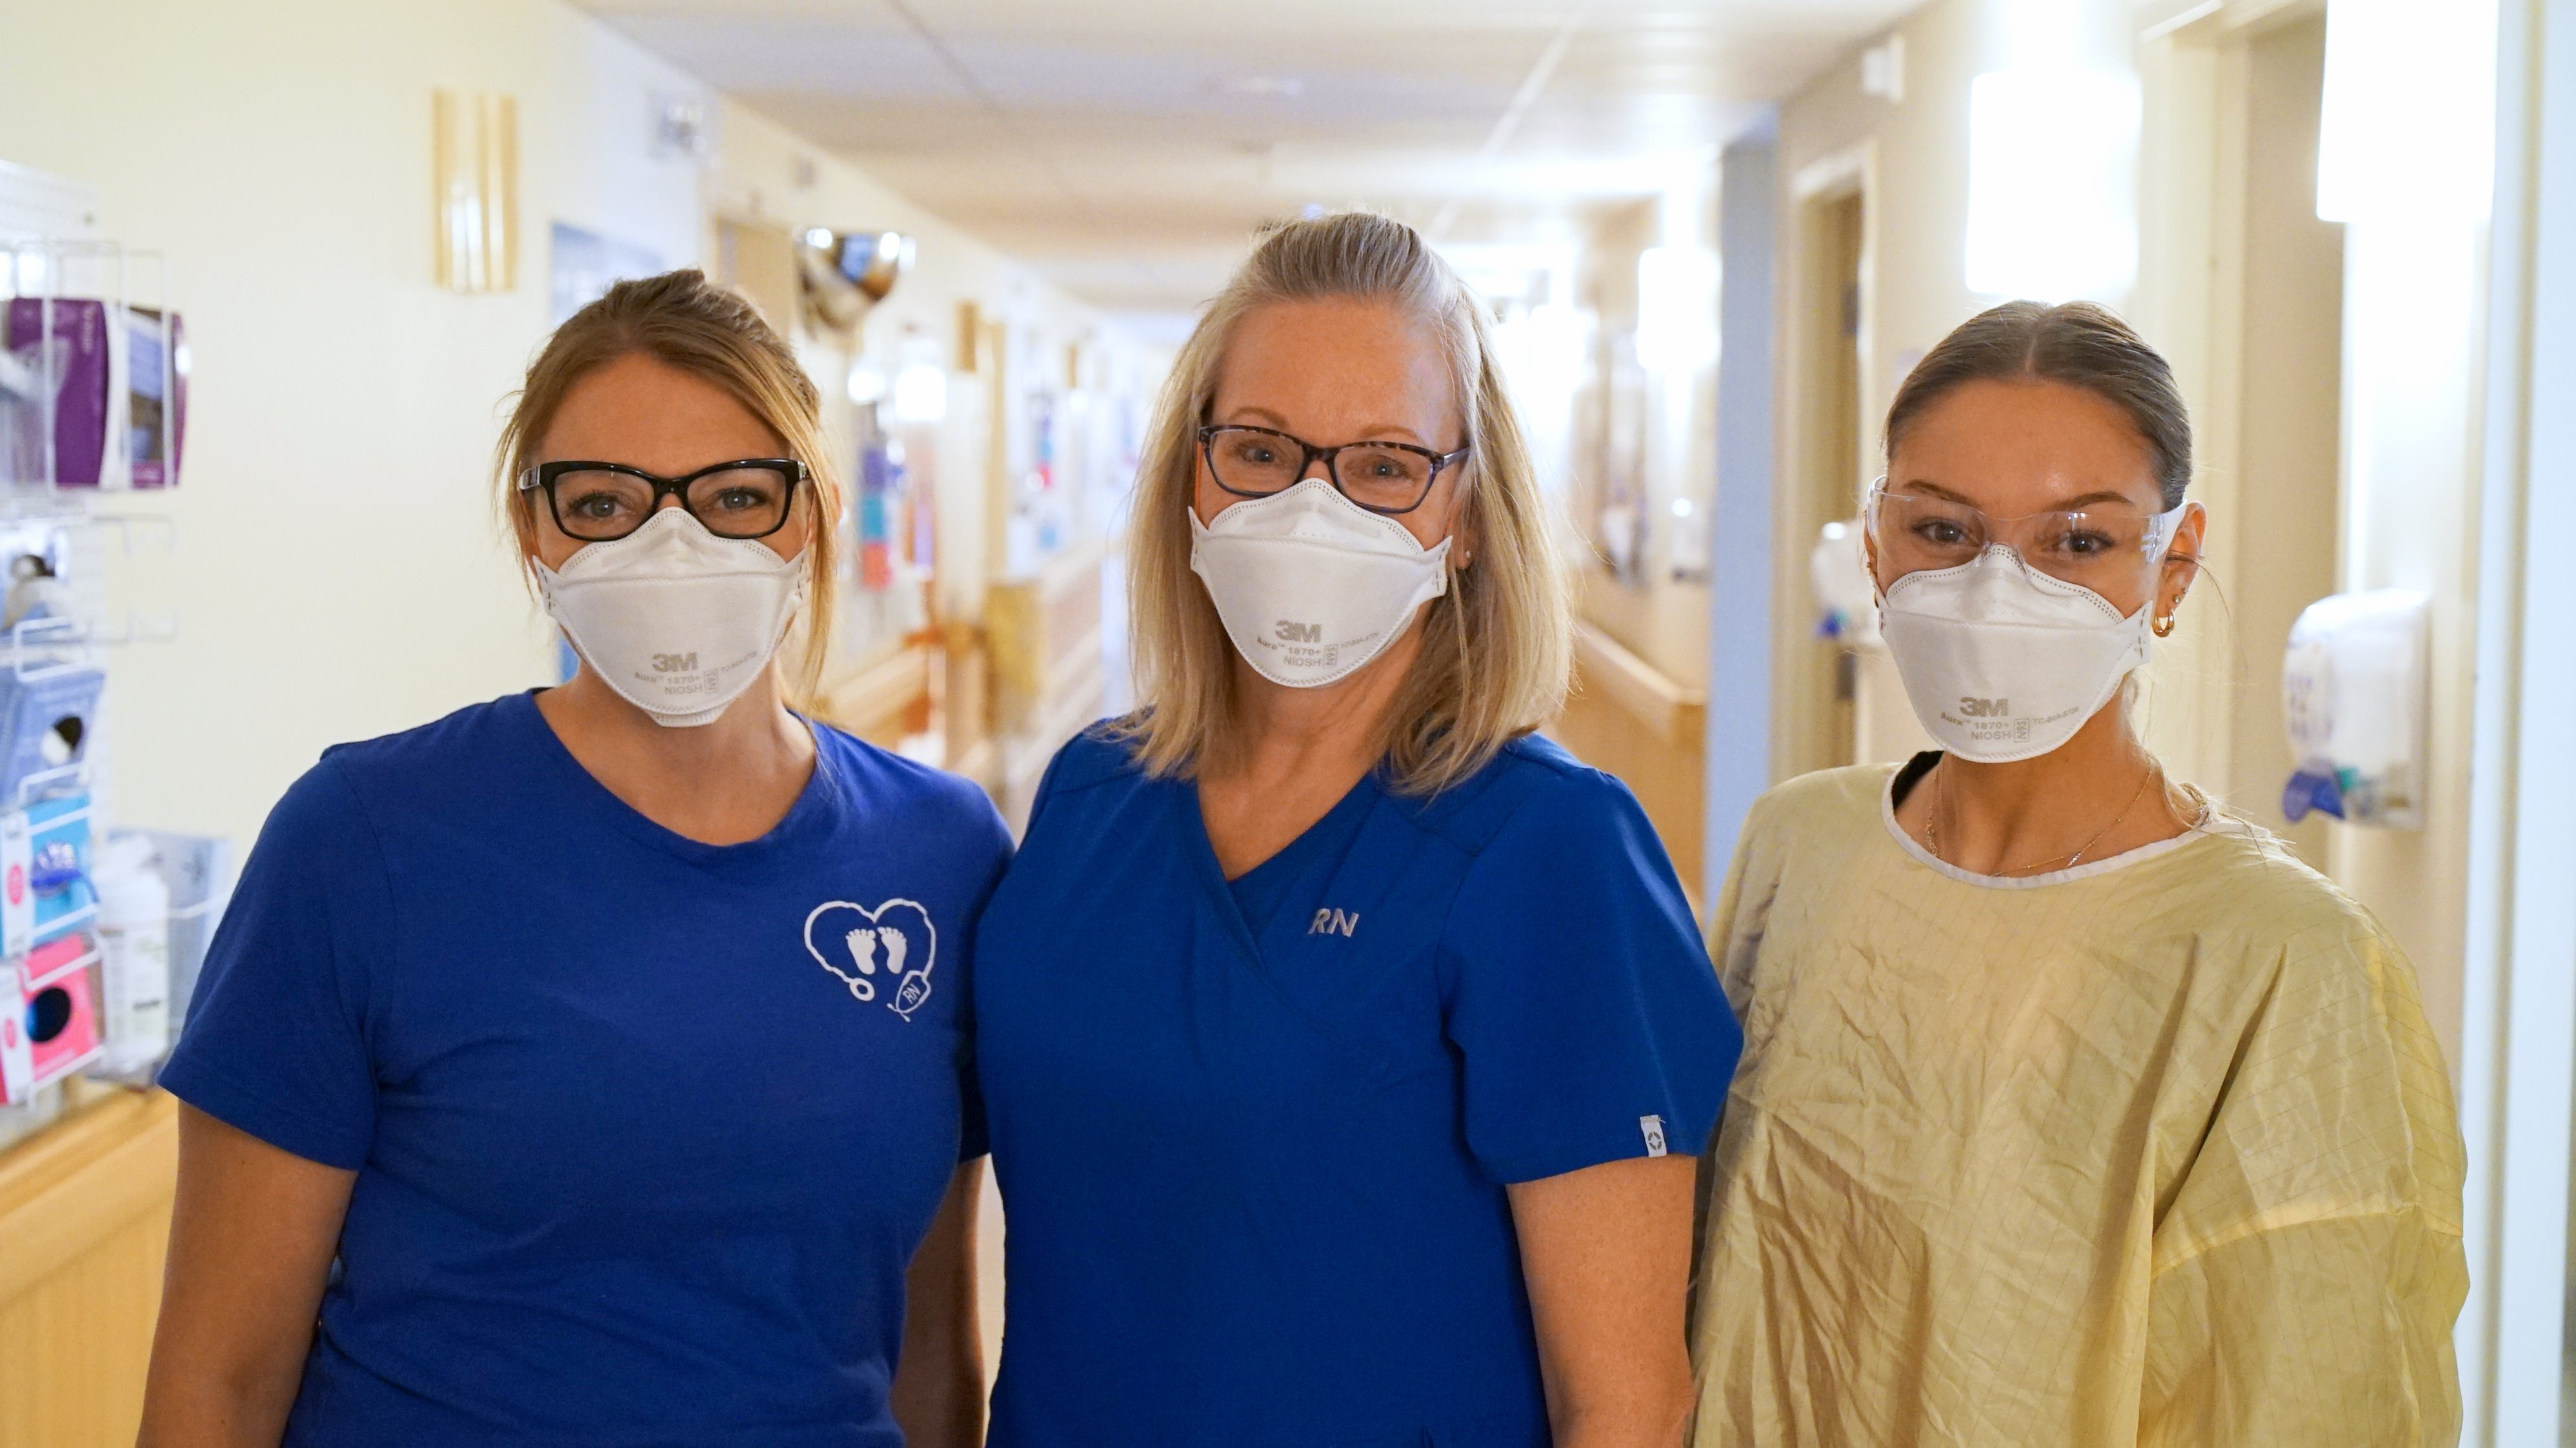 Liz Almeida (centre), a registered nurse in the neonatal intensive care unit at Brantford General Hospital, poses with her clinical manager, Angie Fraser, (left) and daughter Olivia Almeida), who has recently joined the Brant Community Healthcare System as a COVID screener.